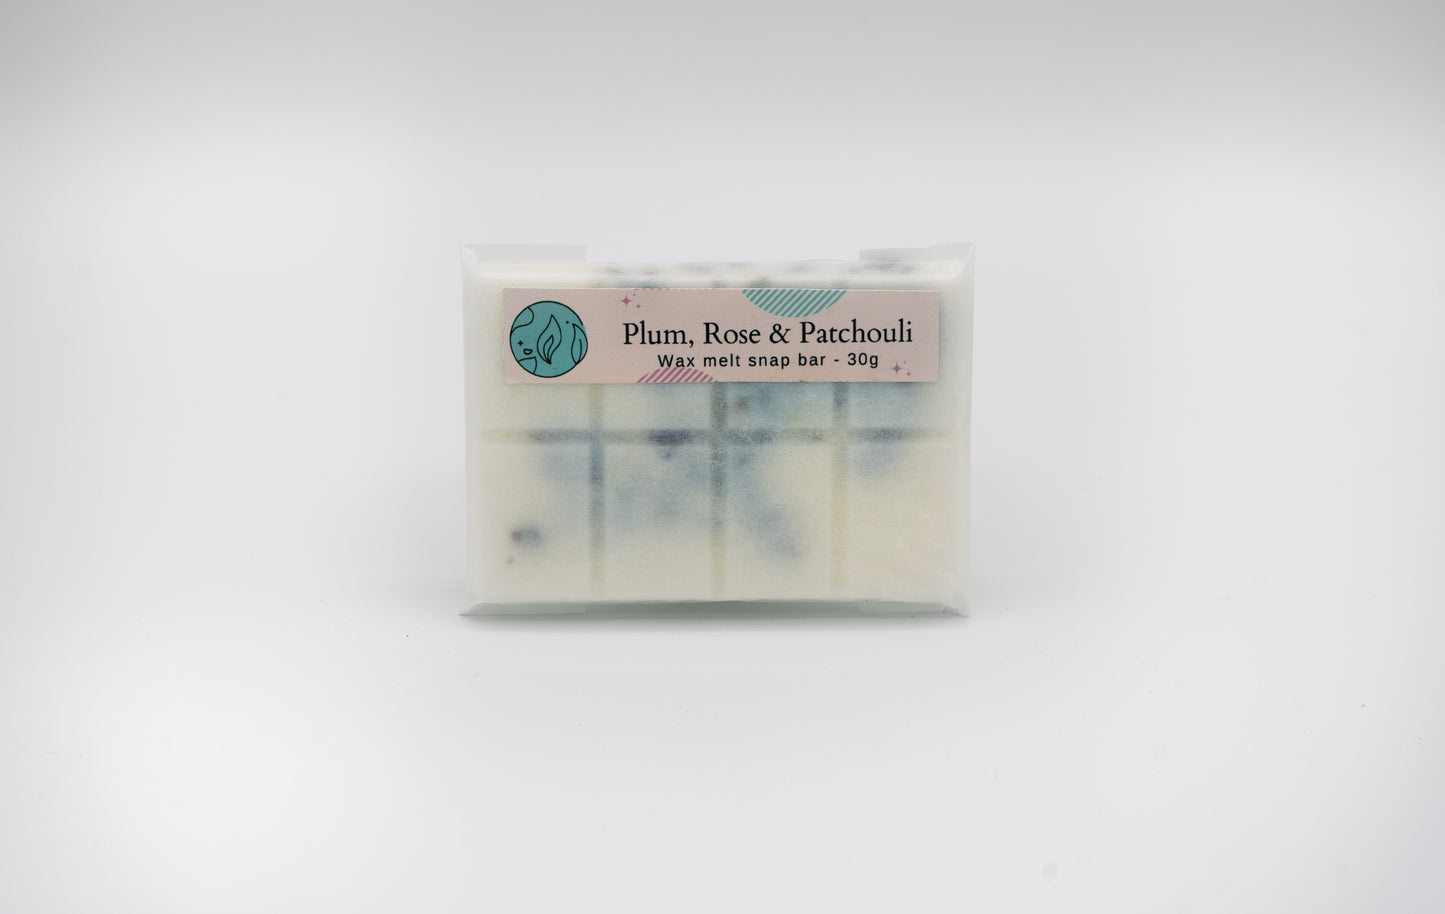 Plum, rose & patchouli scented 30g or 90g strongly scented wax melt snap bars. Eco friendly waxed paper packaging. Brighton Rock Workshop wax melts made in Spain and the United Kingdom, available in two sizes. Suitable for tea light or electric burners